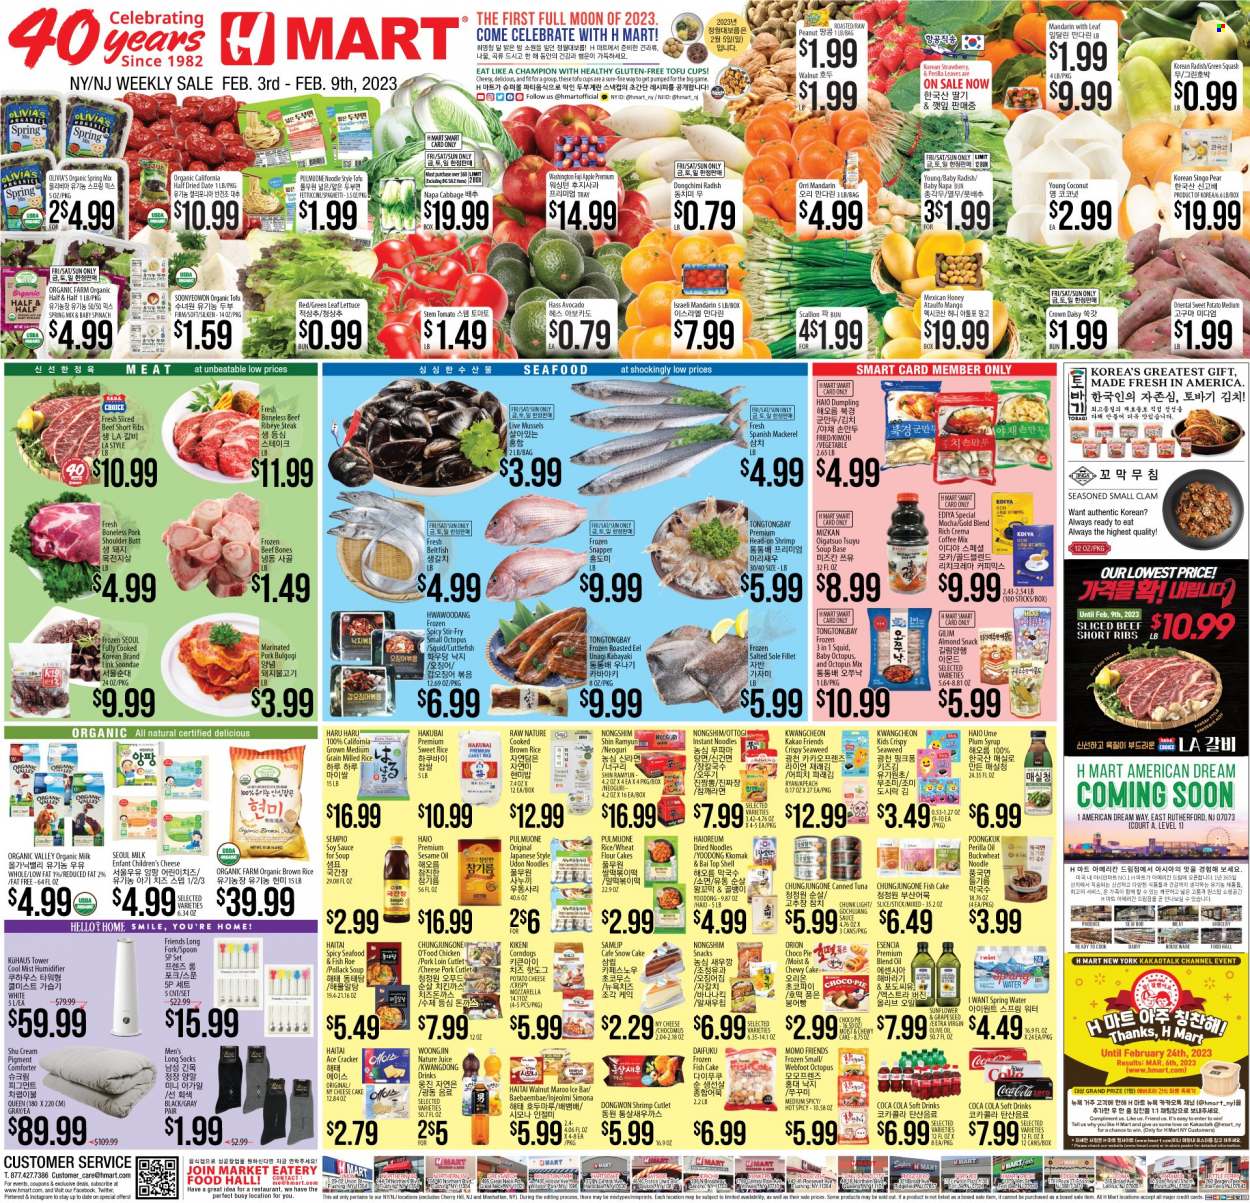 thumbnail - Hmart Flyer - 02/03/2023 - 02/09/2023 - Sales products - pie, cheesecake, cabbage, radishes, sweet potato, zucchini, lettuce, avocado, mandarines, pears, Fuji apple, coconut, clams, cuttlefish, eel, mackerel, mussels, squid, tuna, pollock, octopus, seafood, fish, shrimps, spaghetti, soup, instant noodles, dumplings, noodles, mozzarella, cheese, tofu, organic milk, fish cake, snack, crackers, flour, wheat flour, seaweed, canned tuna, brown rice, buckwheat, soy sauce, sesame oil, honey, syrup, Coca-Cola, juice, soft drink, Bai, spring water, coffee, beef meat, beef ribs, beef steak, steak, ribeye steak, ribs, pork loin, pork meat, pork shoulder, marinated pork, Sure, houseware, fork, spoon, tray, cup, Half and half. Page 1.